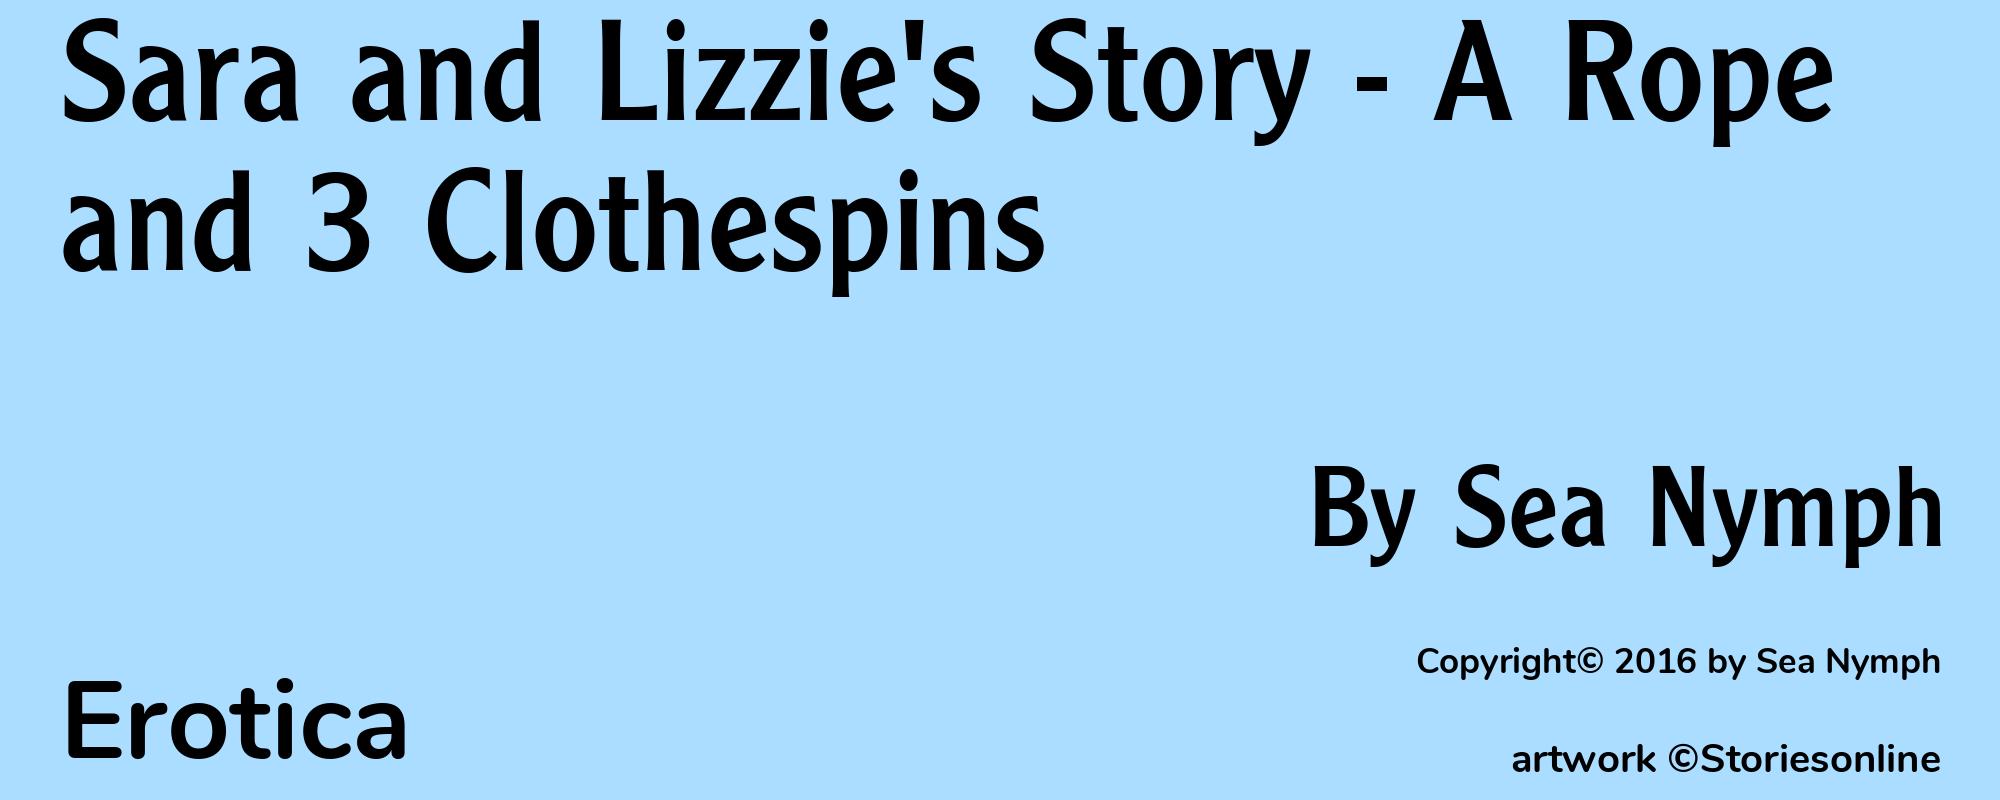 Sara and Lizzie's Story - A Rope and 3 Clothespins - Cover